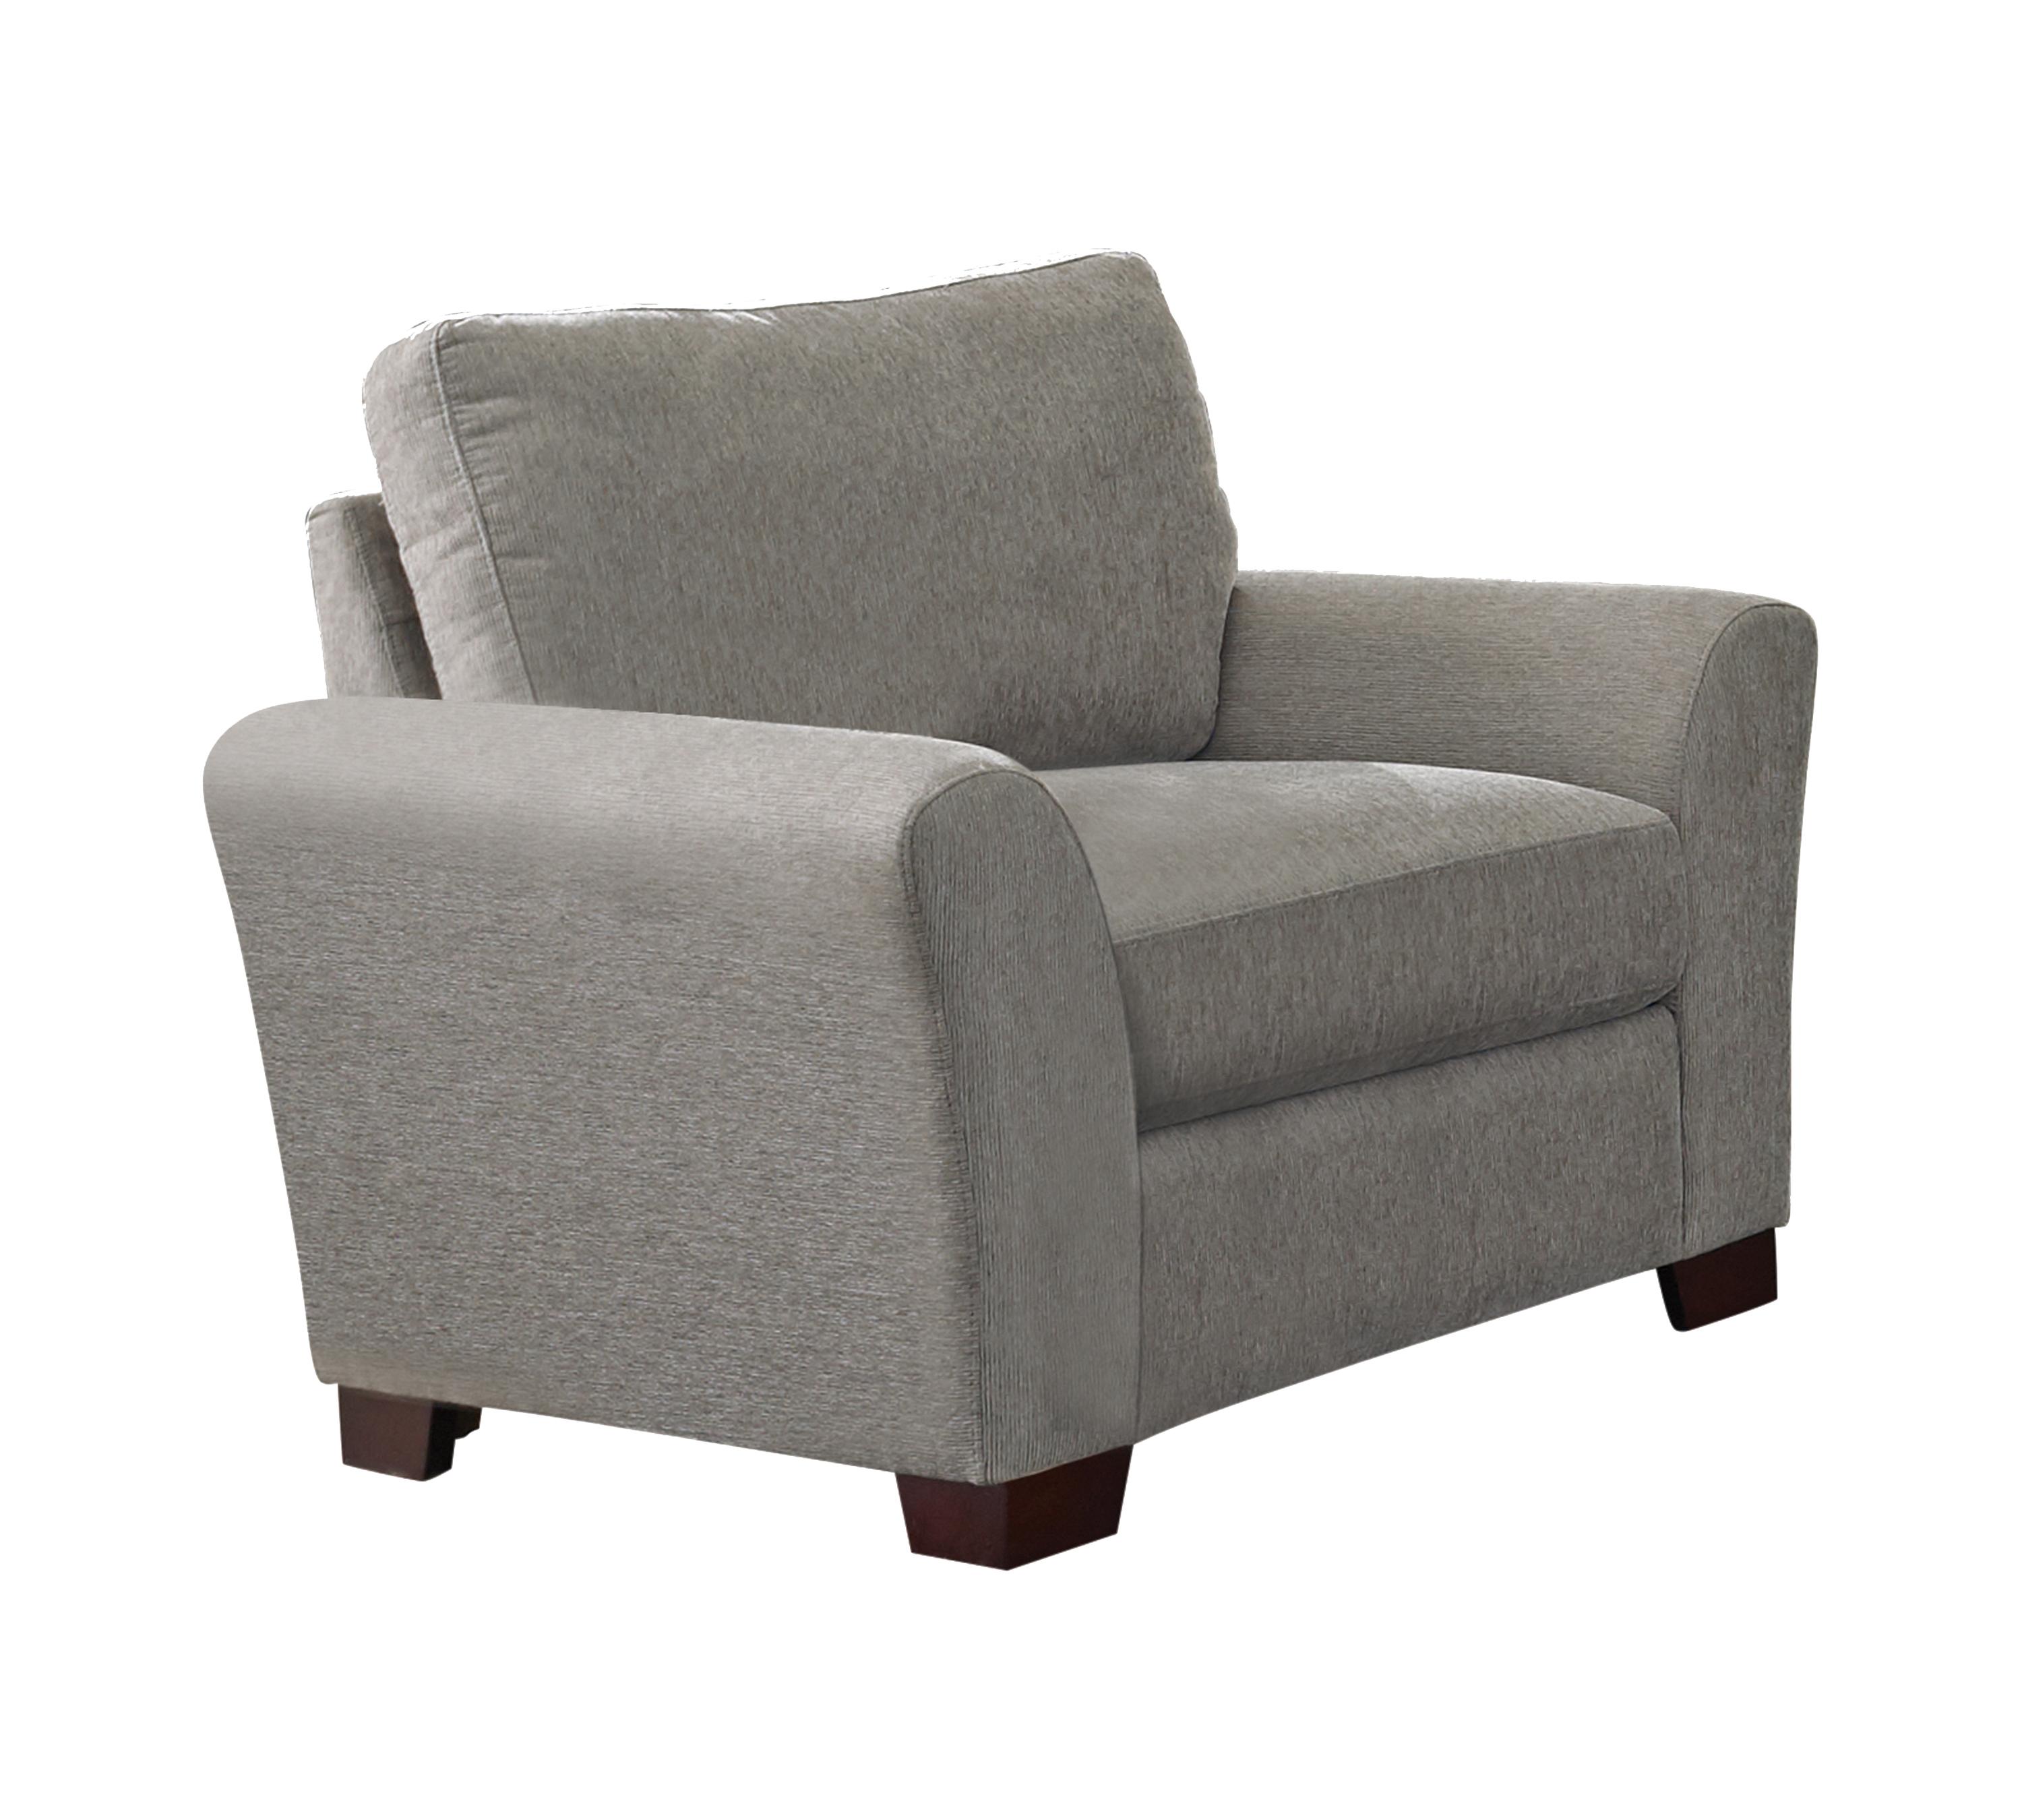 

    
Transitional Warm Gray Woven Fabric Upholstery Arm Chair Coaster 509723 Drayton
